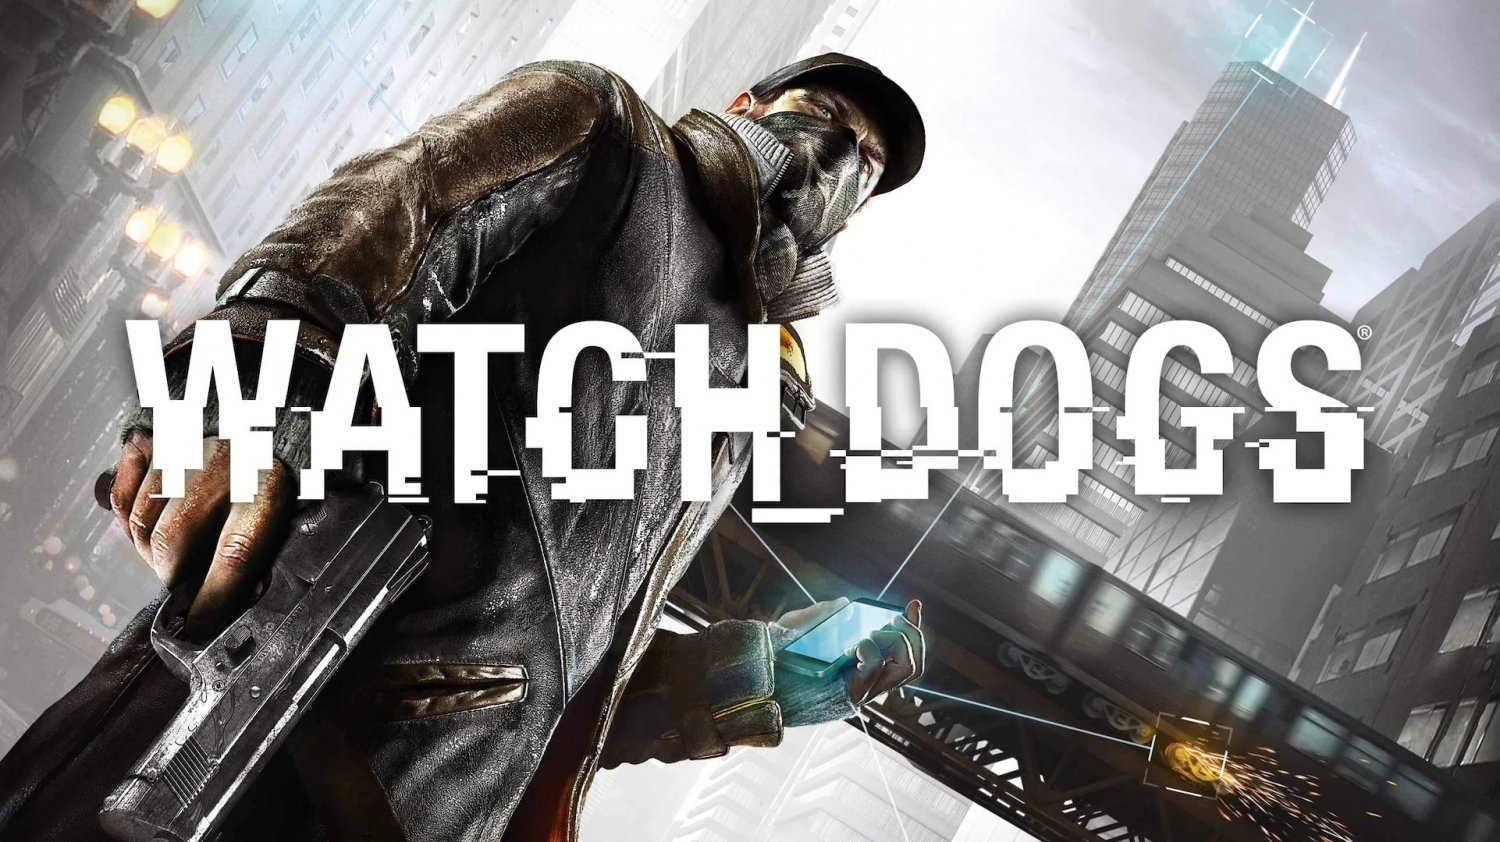 https://static.tweaktown.com/news/7/1/71380_05_watch-dogs-is-free-right-now-on-the-epic-games-store-get-it-here_full.jpg